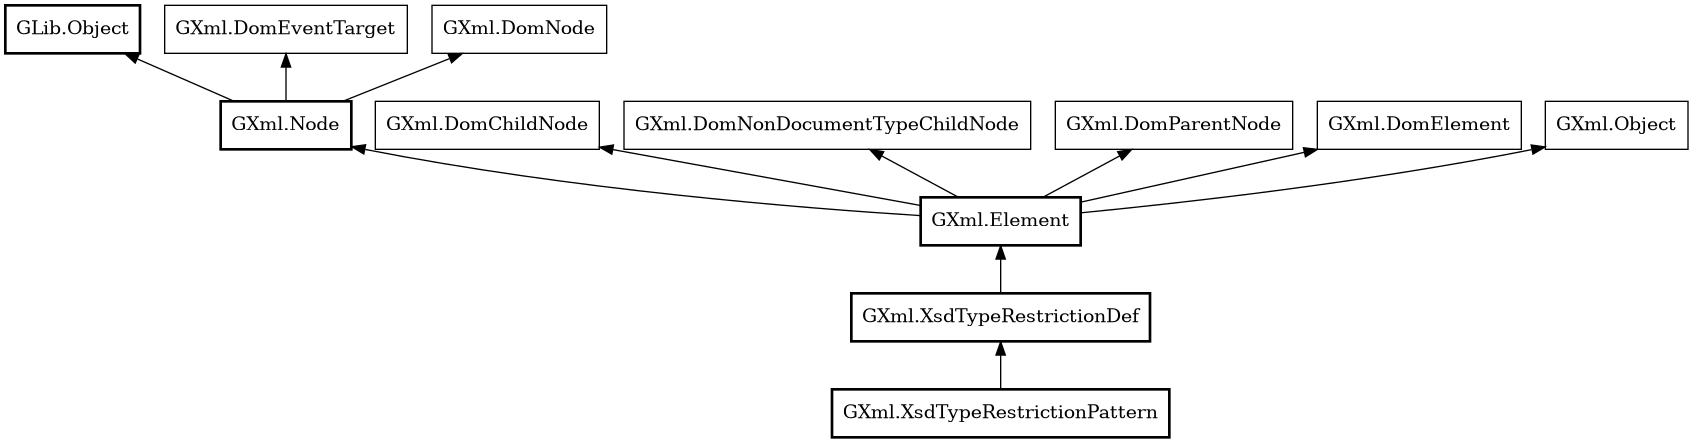 Object hierarchy for XsdTypeRestrictionPattern